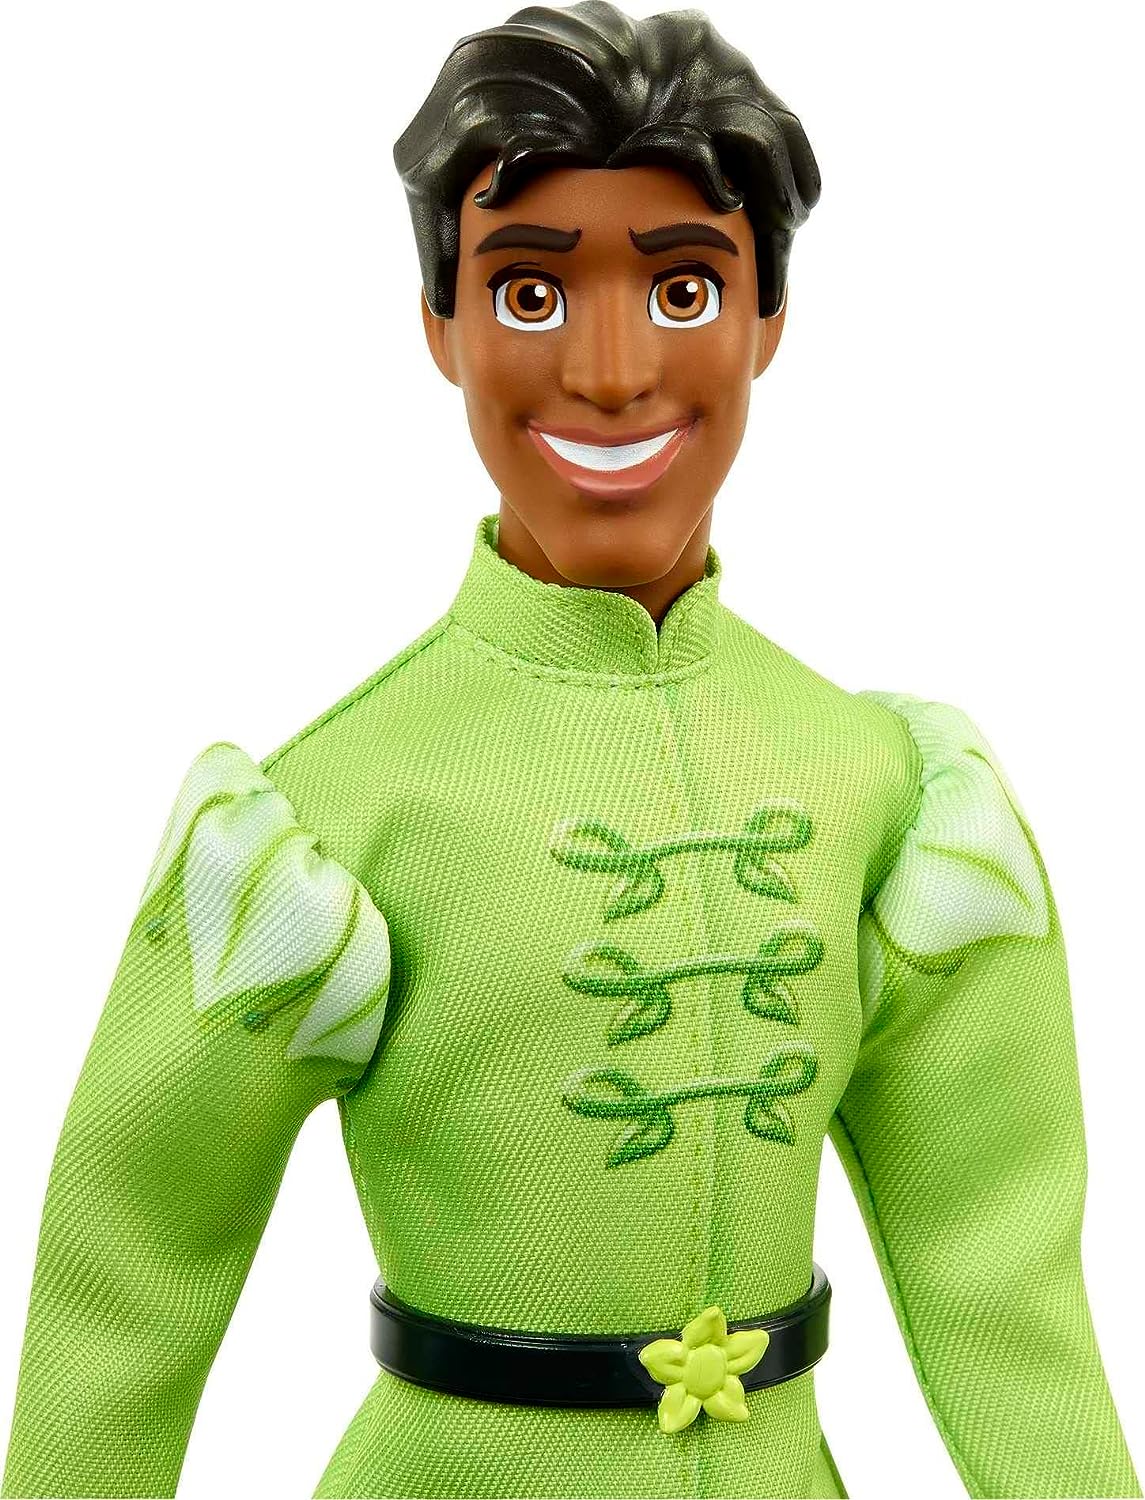 Disney Princess Posable Prince Naveen Fashion Doll In Signature Look Inspired By The Disney Movie The Princess and The Frog For Kids Ages 3+